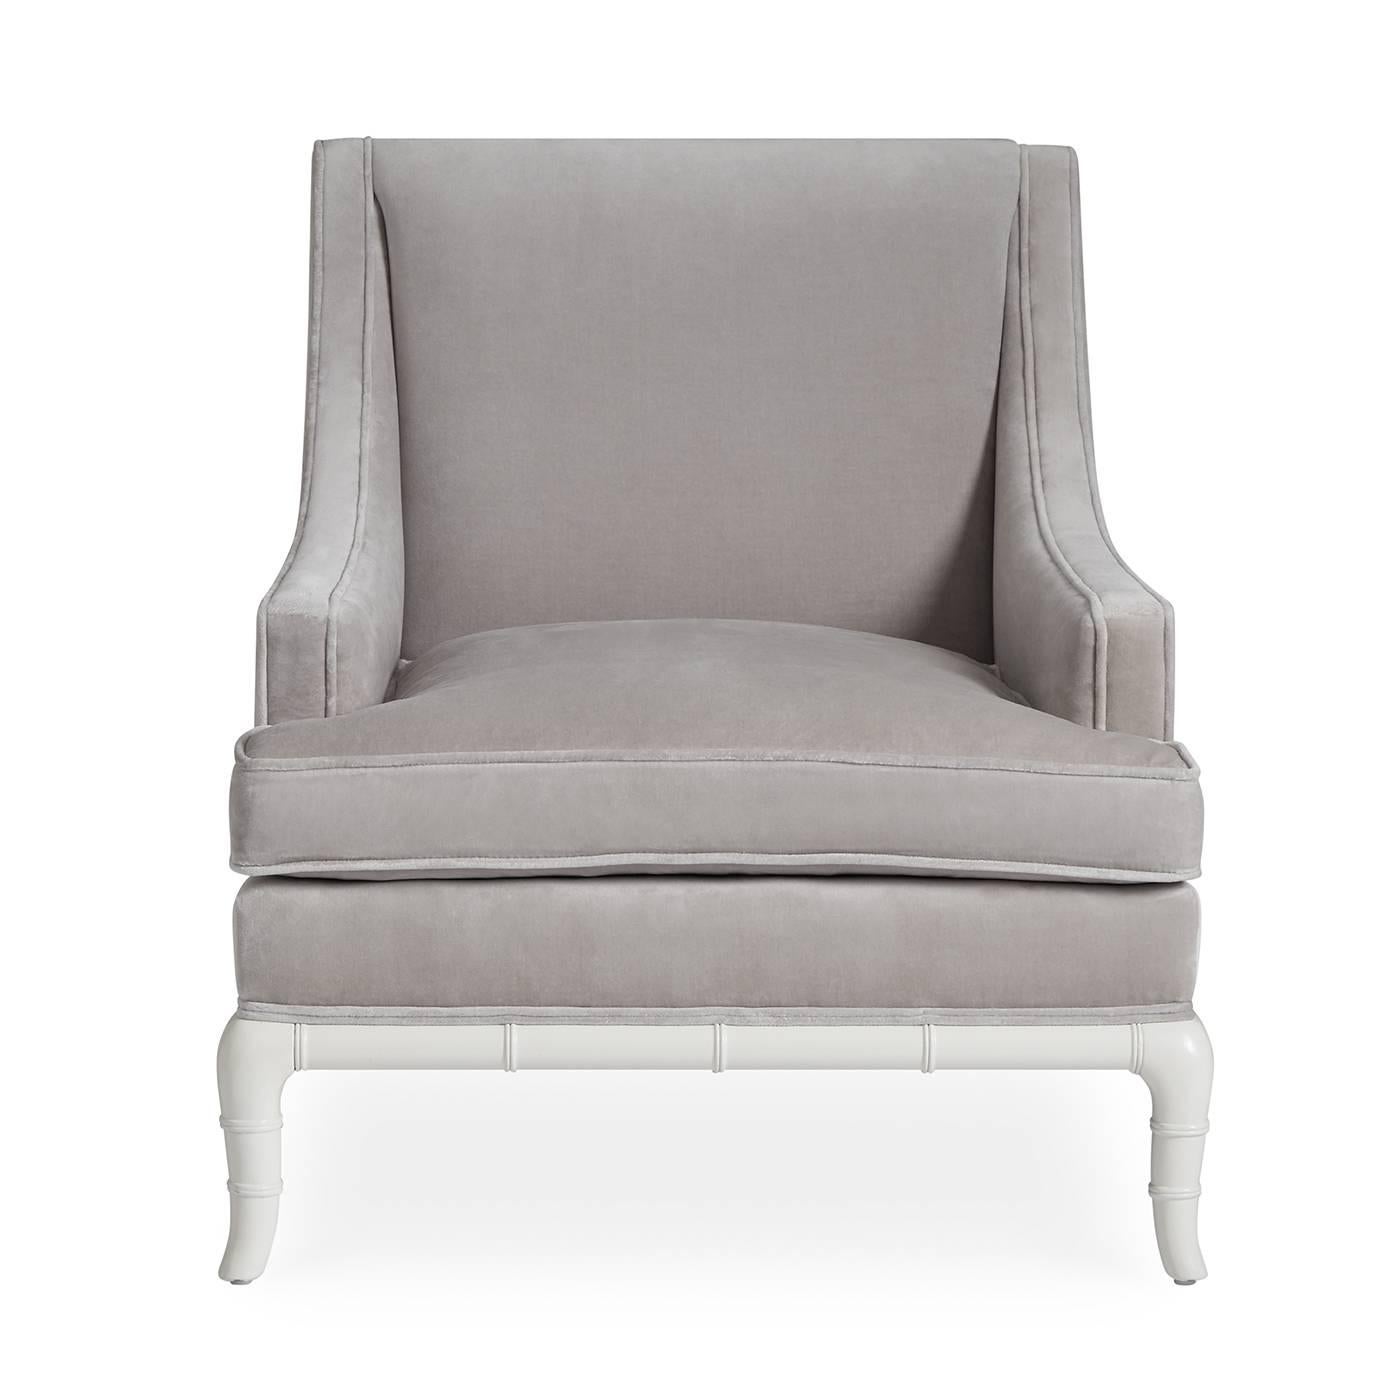 Crisp and classic. Our updated spin on the English club chair with a dash of Chinoiserie. The deep seat and low-slung arms put comfort first, and the glossy white faux bamboo base adds a powerful punch of style. Upholstered in a velvet-blend in the